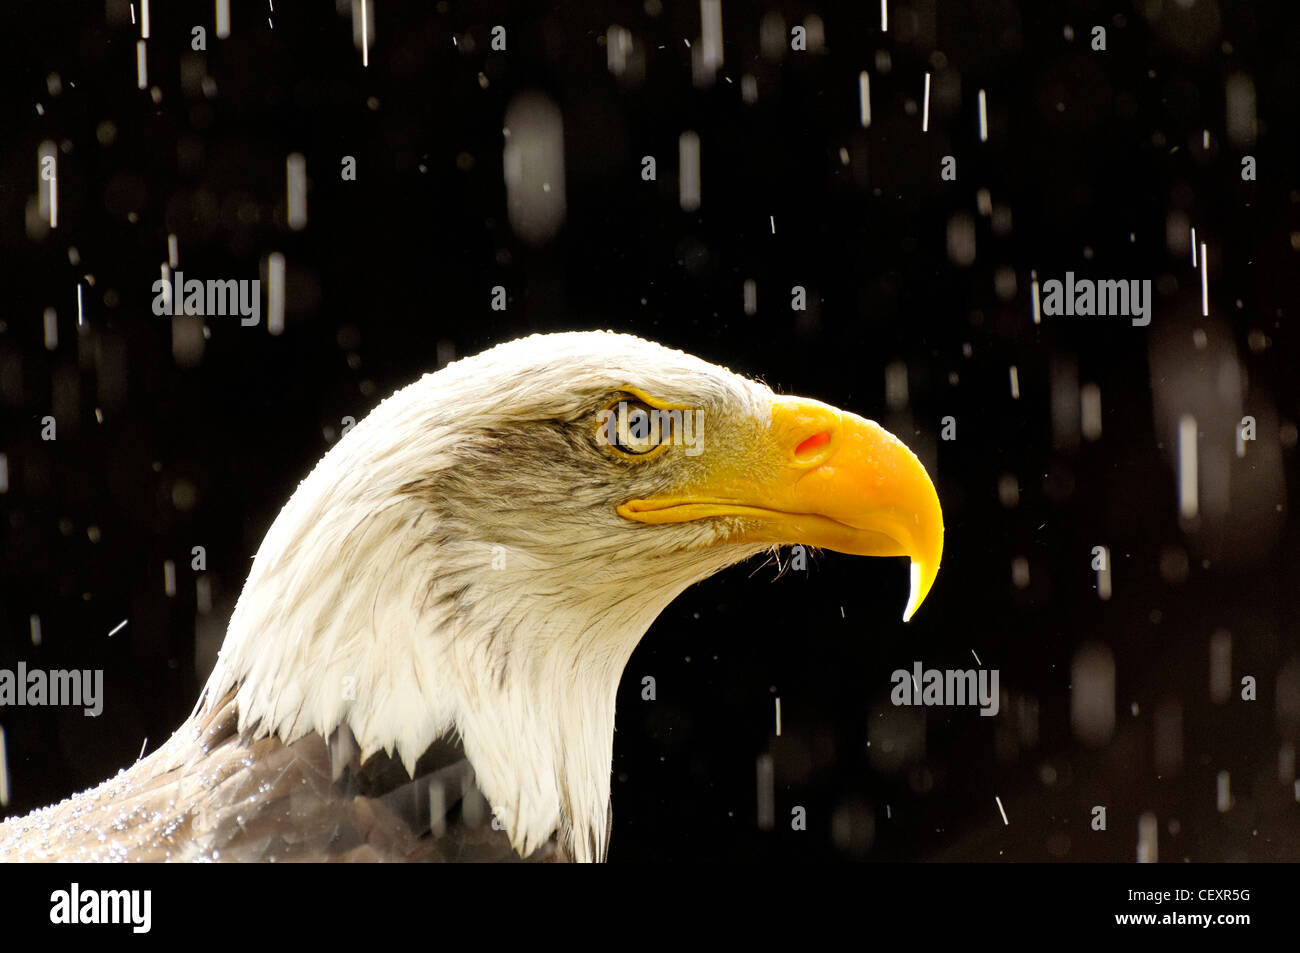 A portrait of an American Bald Eagle in the rain Stock Photo